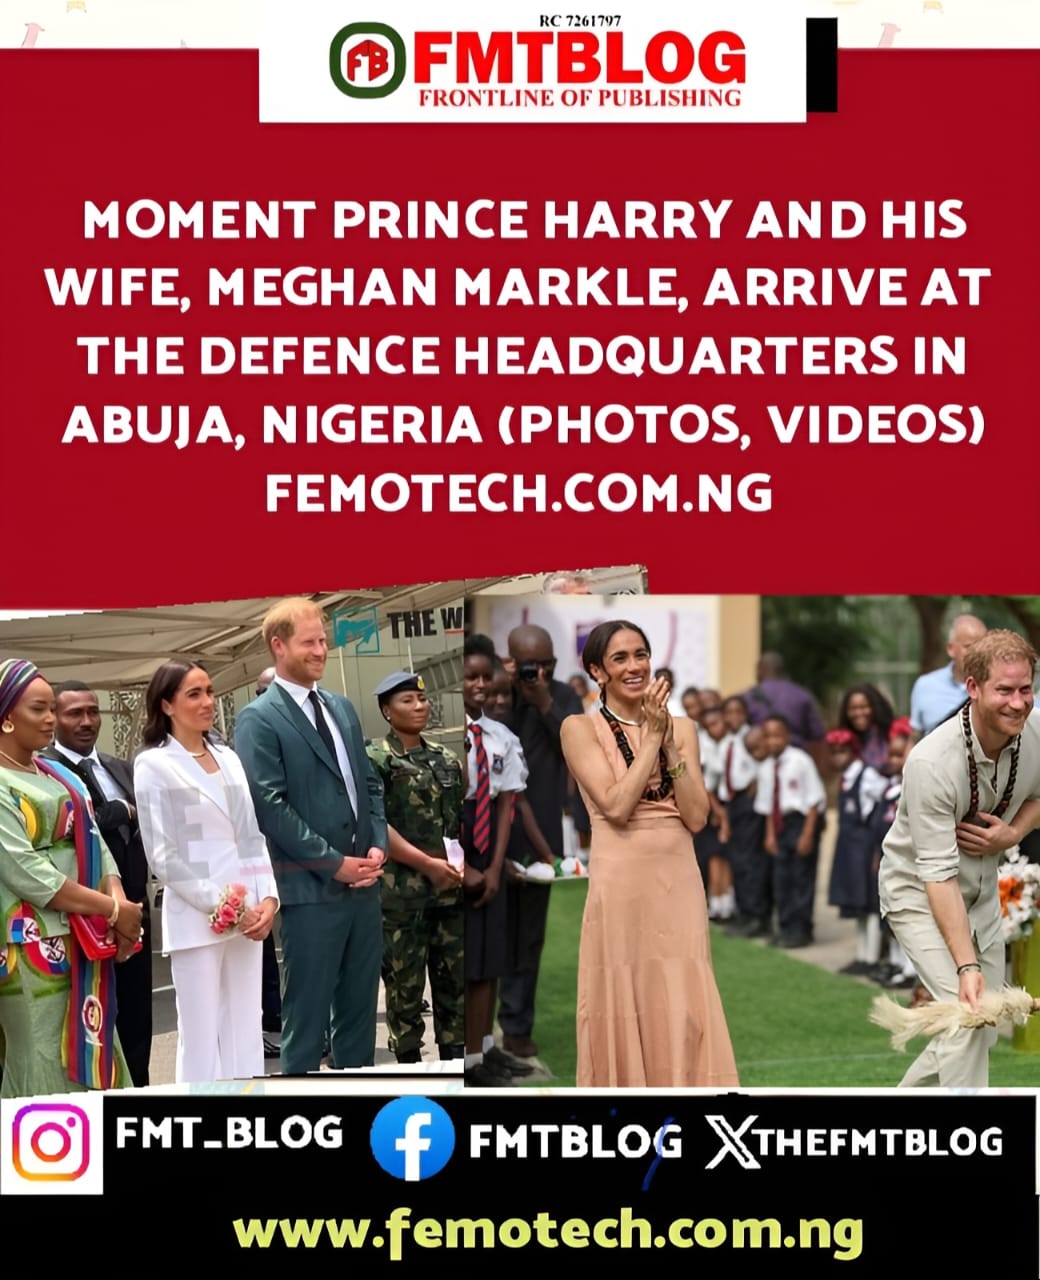 Moment Prince Harry And His Wife, Meghan Markle, Arrive At The Defence Headquarters in Abuja, Nigeria(PHOTOS, VIDEOS)